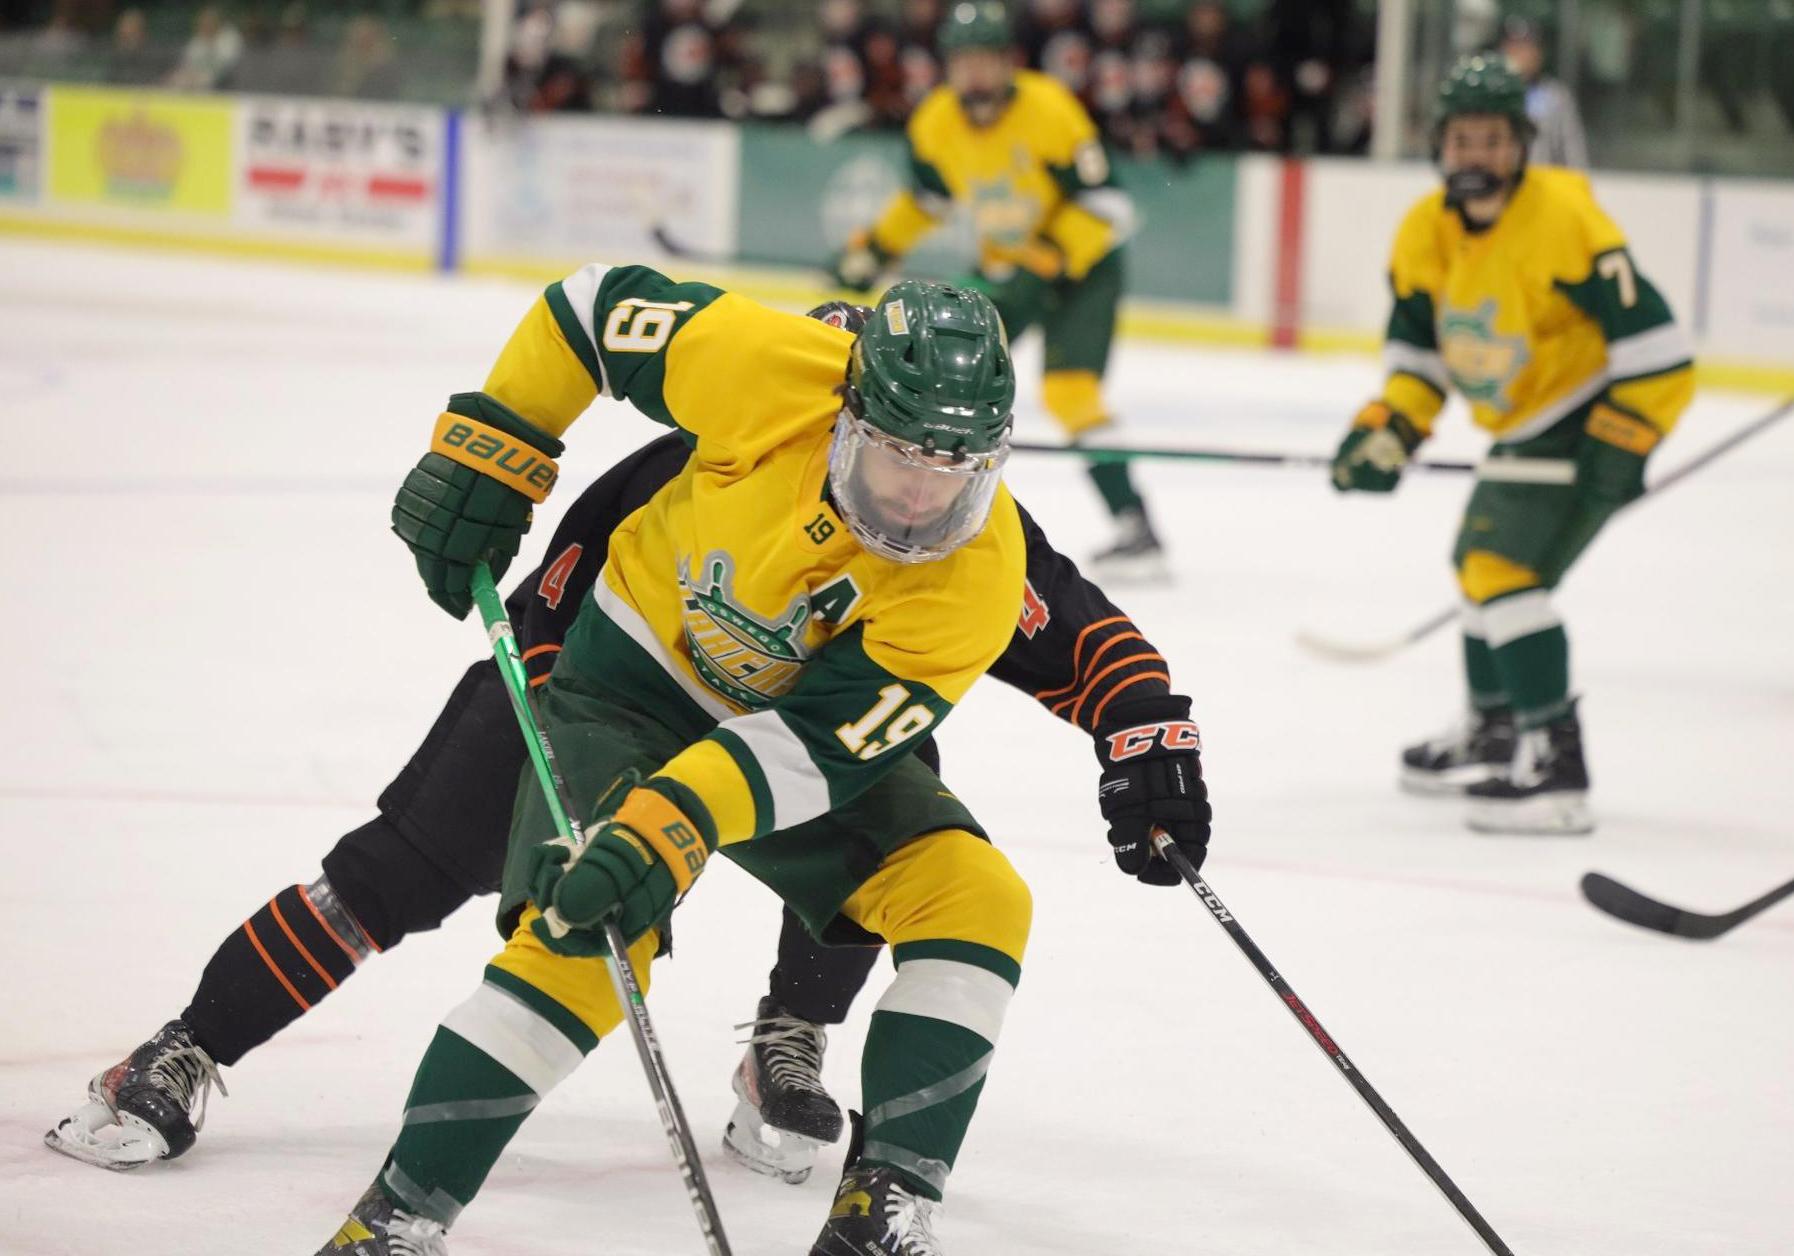 The Laker men's hockey team will host the annual Oswego State Men’s Hockey Classic on Dec. 30 and 31 during the Winter Break Cruisin' the Campus